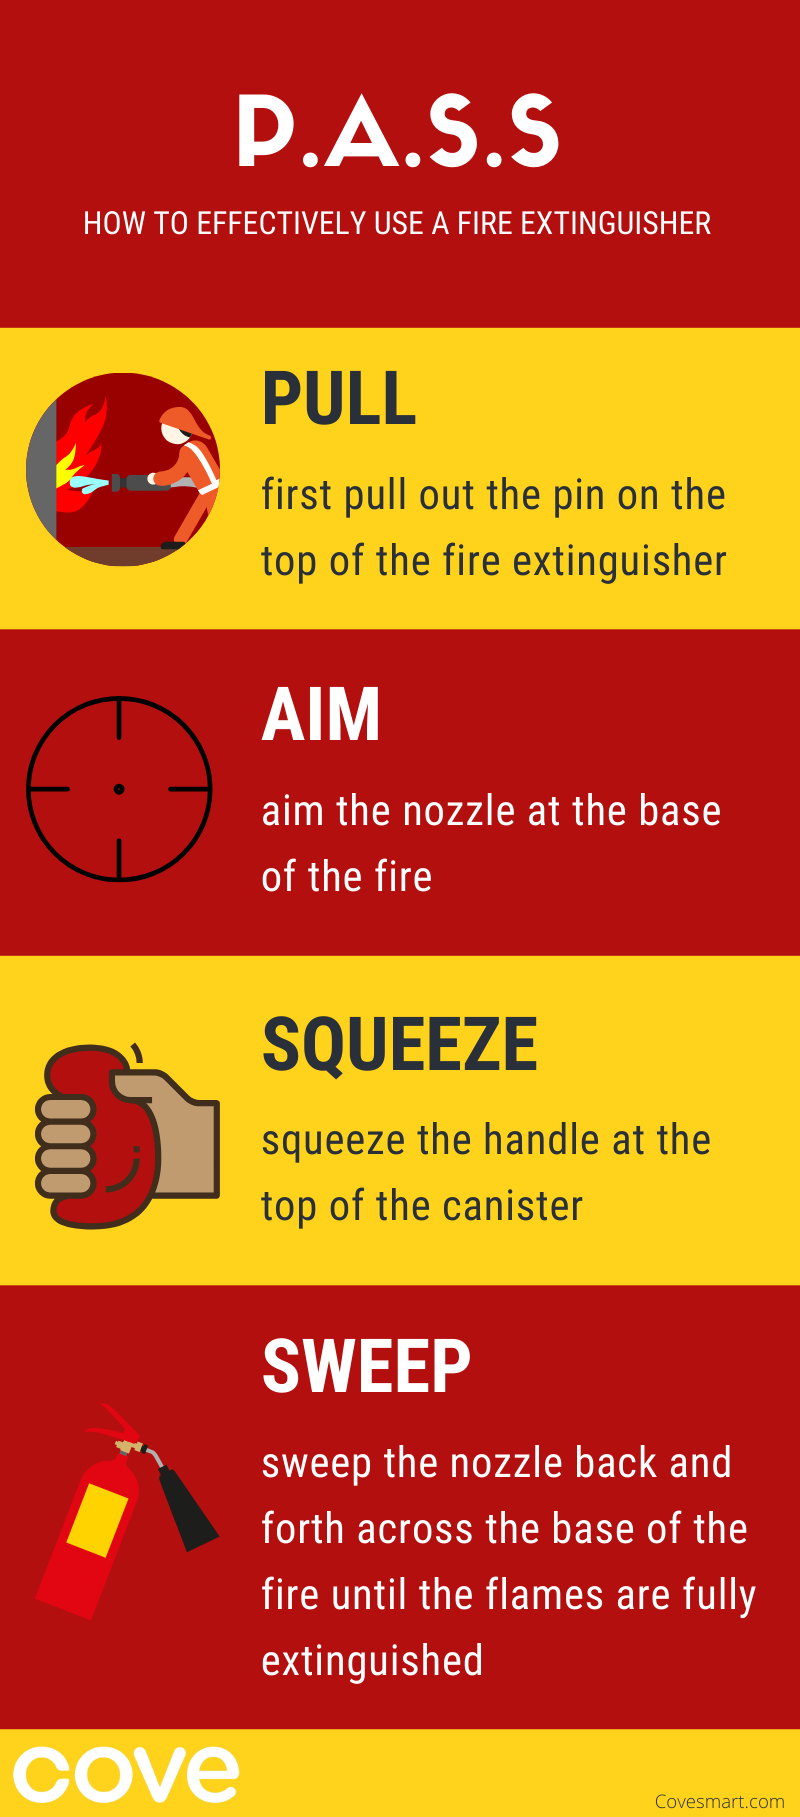 Pull, Aim, Squeeze, Sweep to put out the fire with a fire extinguisher.